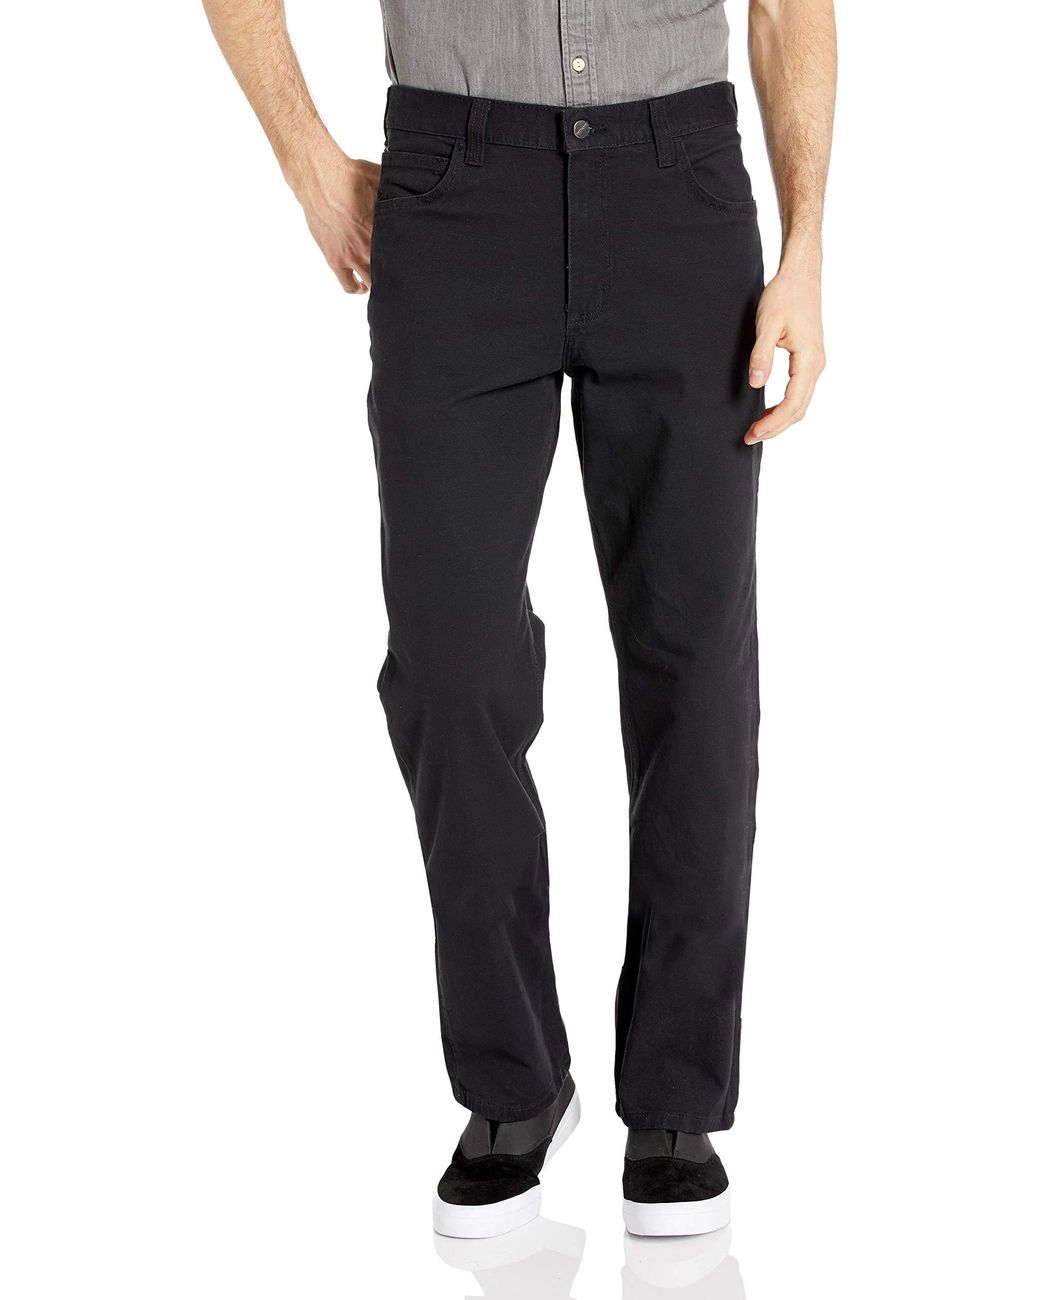 Carhartt Cotton Rugged Flex Rigby Five Pocket Pant for Men - Save 10% ...